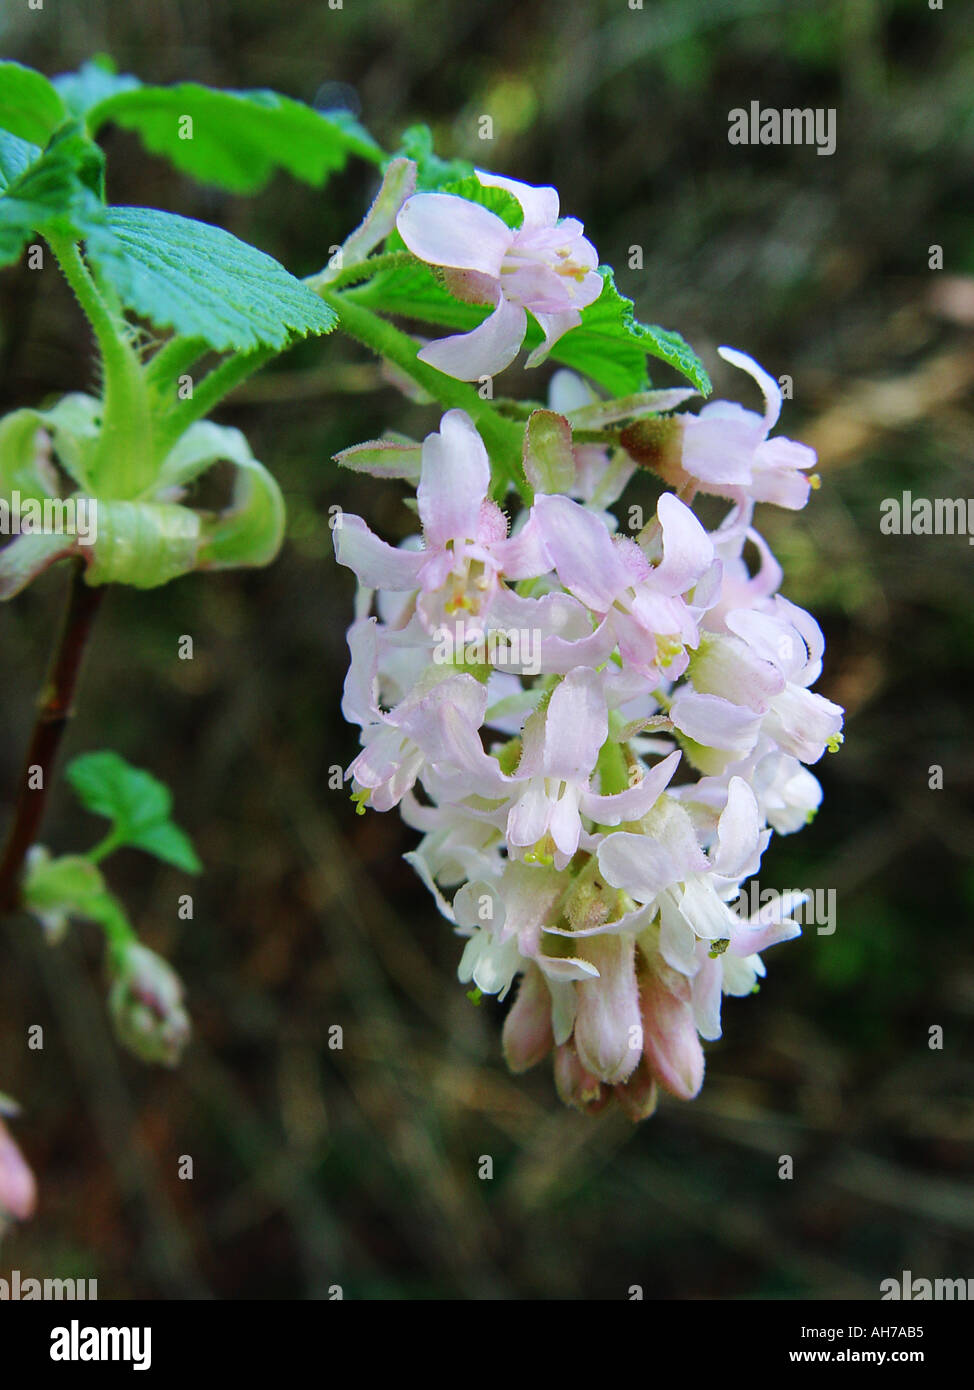 Ribes white Flowering currant bloom flower Stock Photo